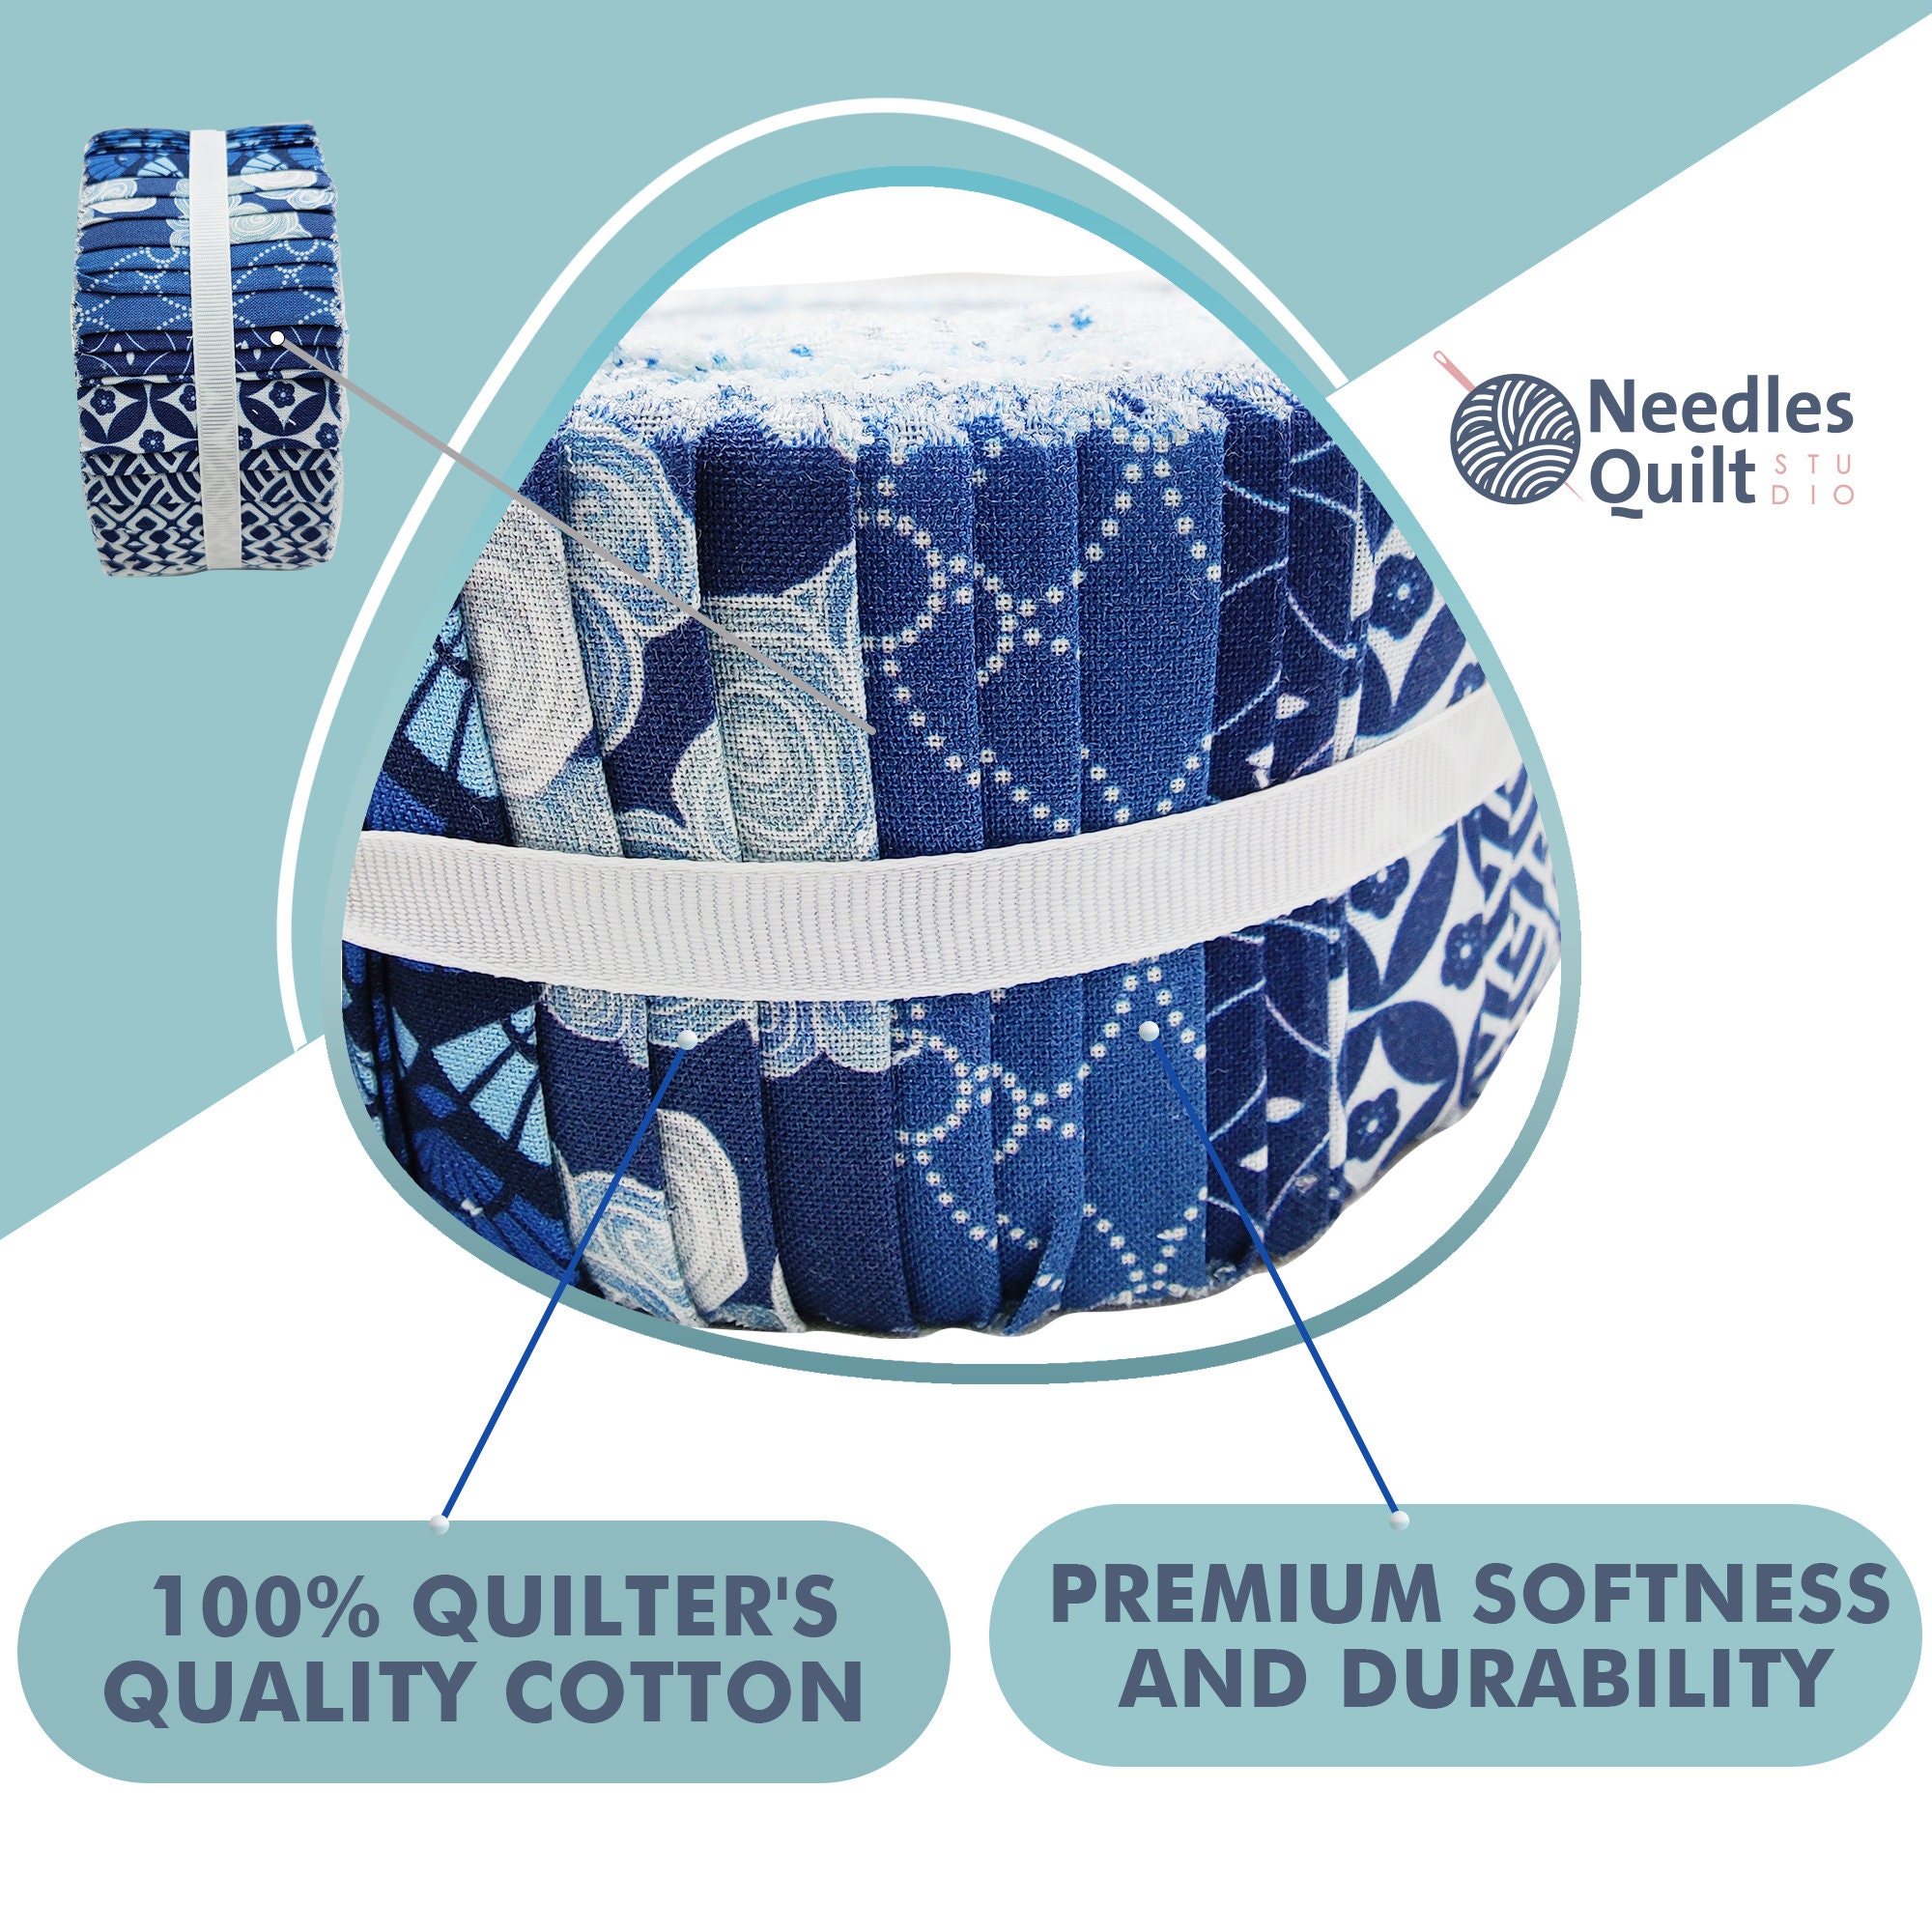 Needles Quilt Studio - 2.5 Precut 40 Fabric Strip Bundle (Summer Forest) | Cotton Strips Bundles for Quilting - Jelly Rolls for Quilting Assortment F